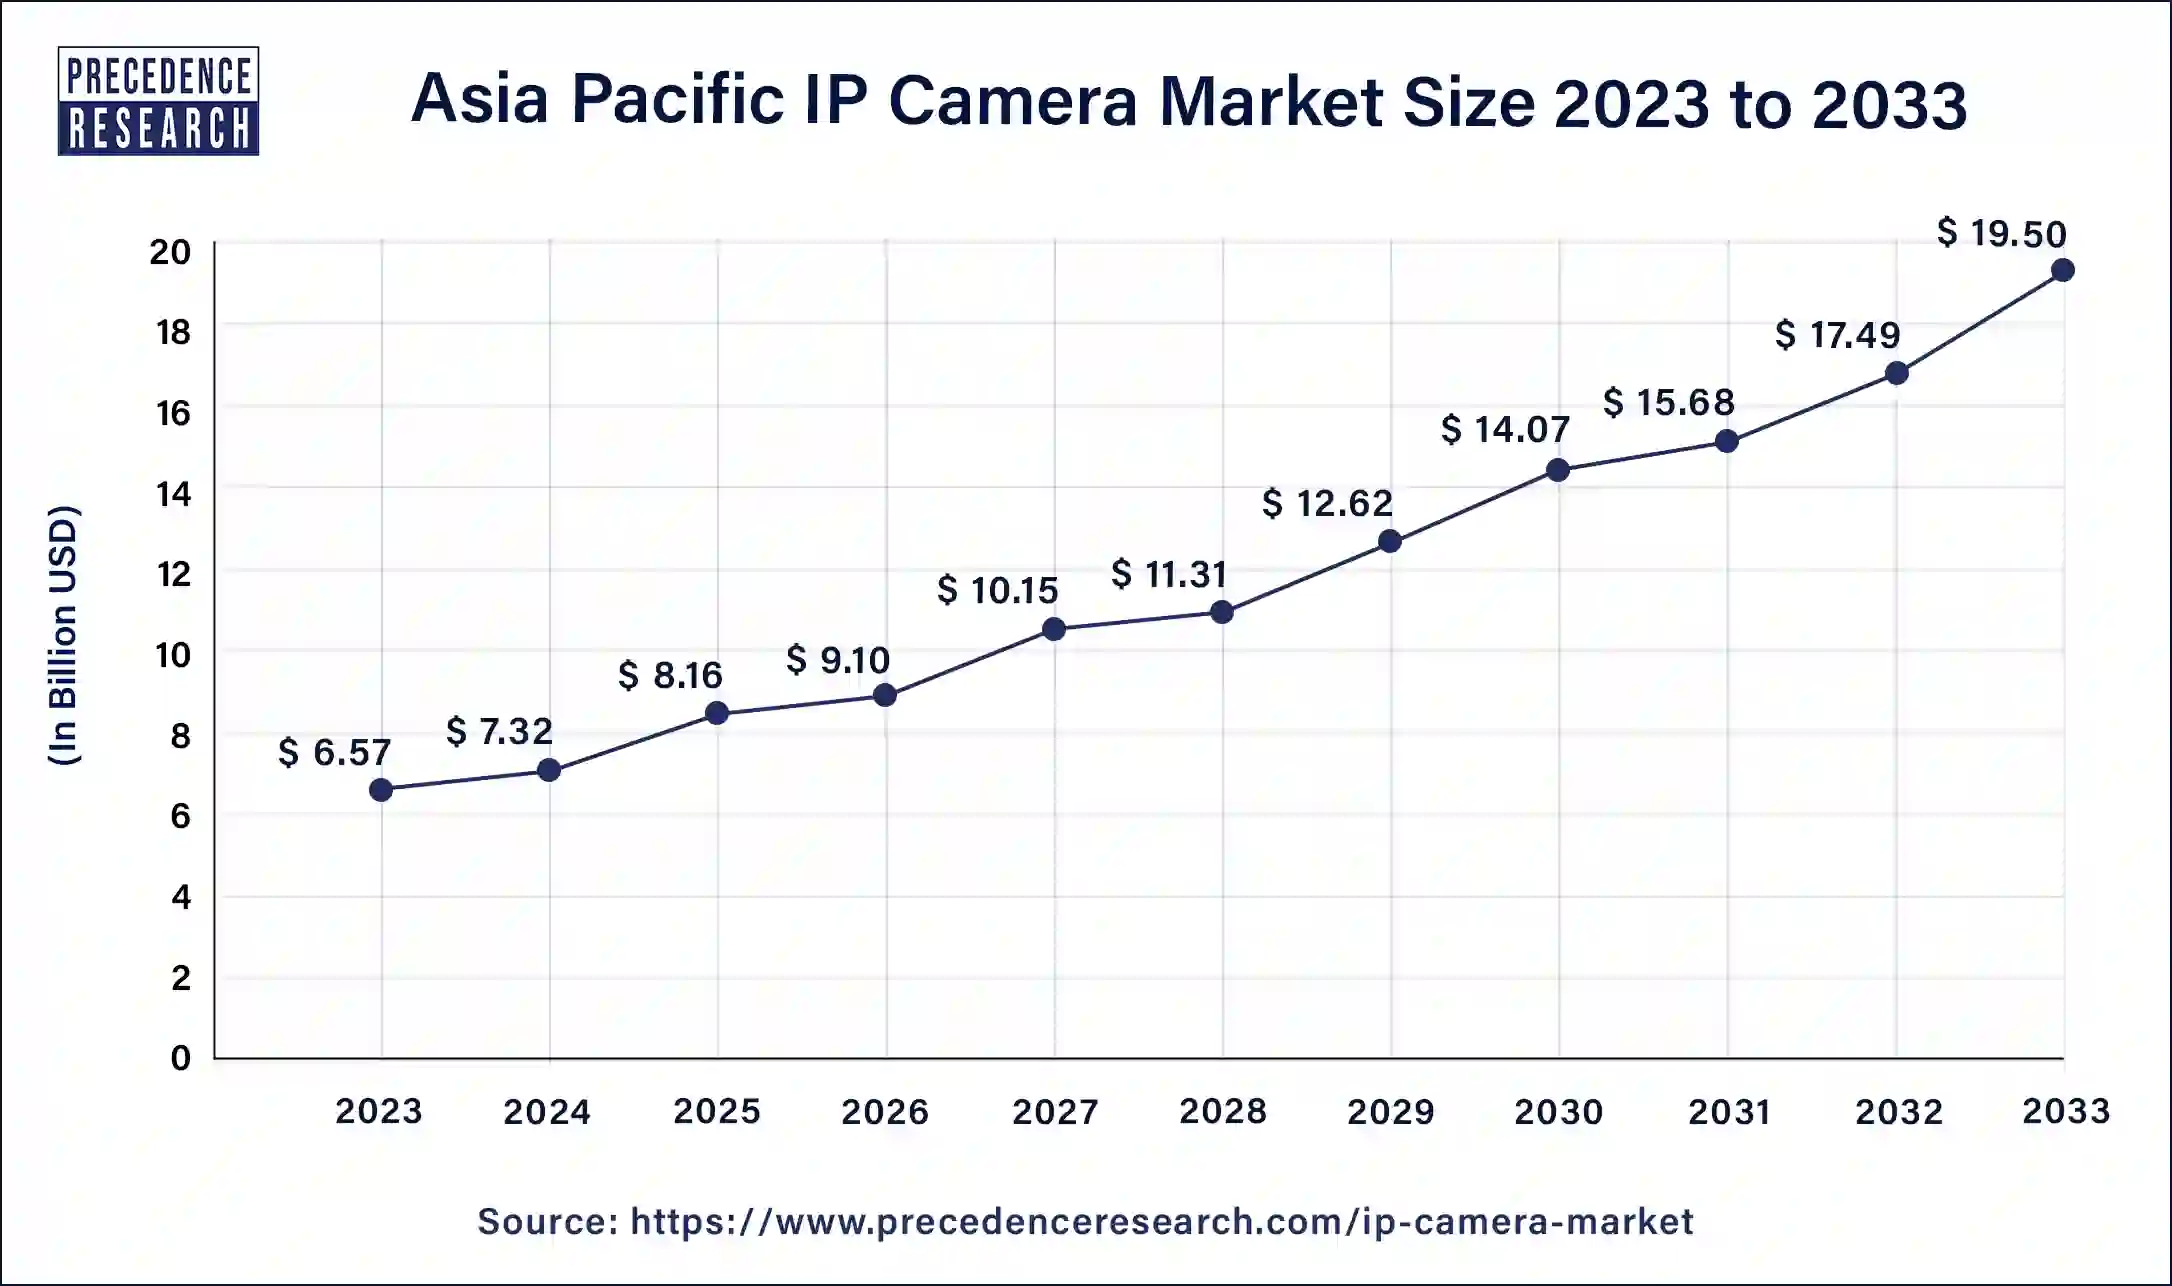 Asia Pacific IP Camera Market Size 2024 to 2033